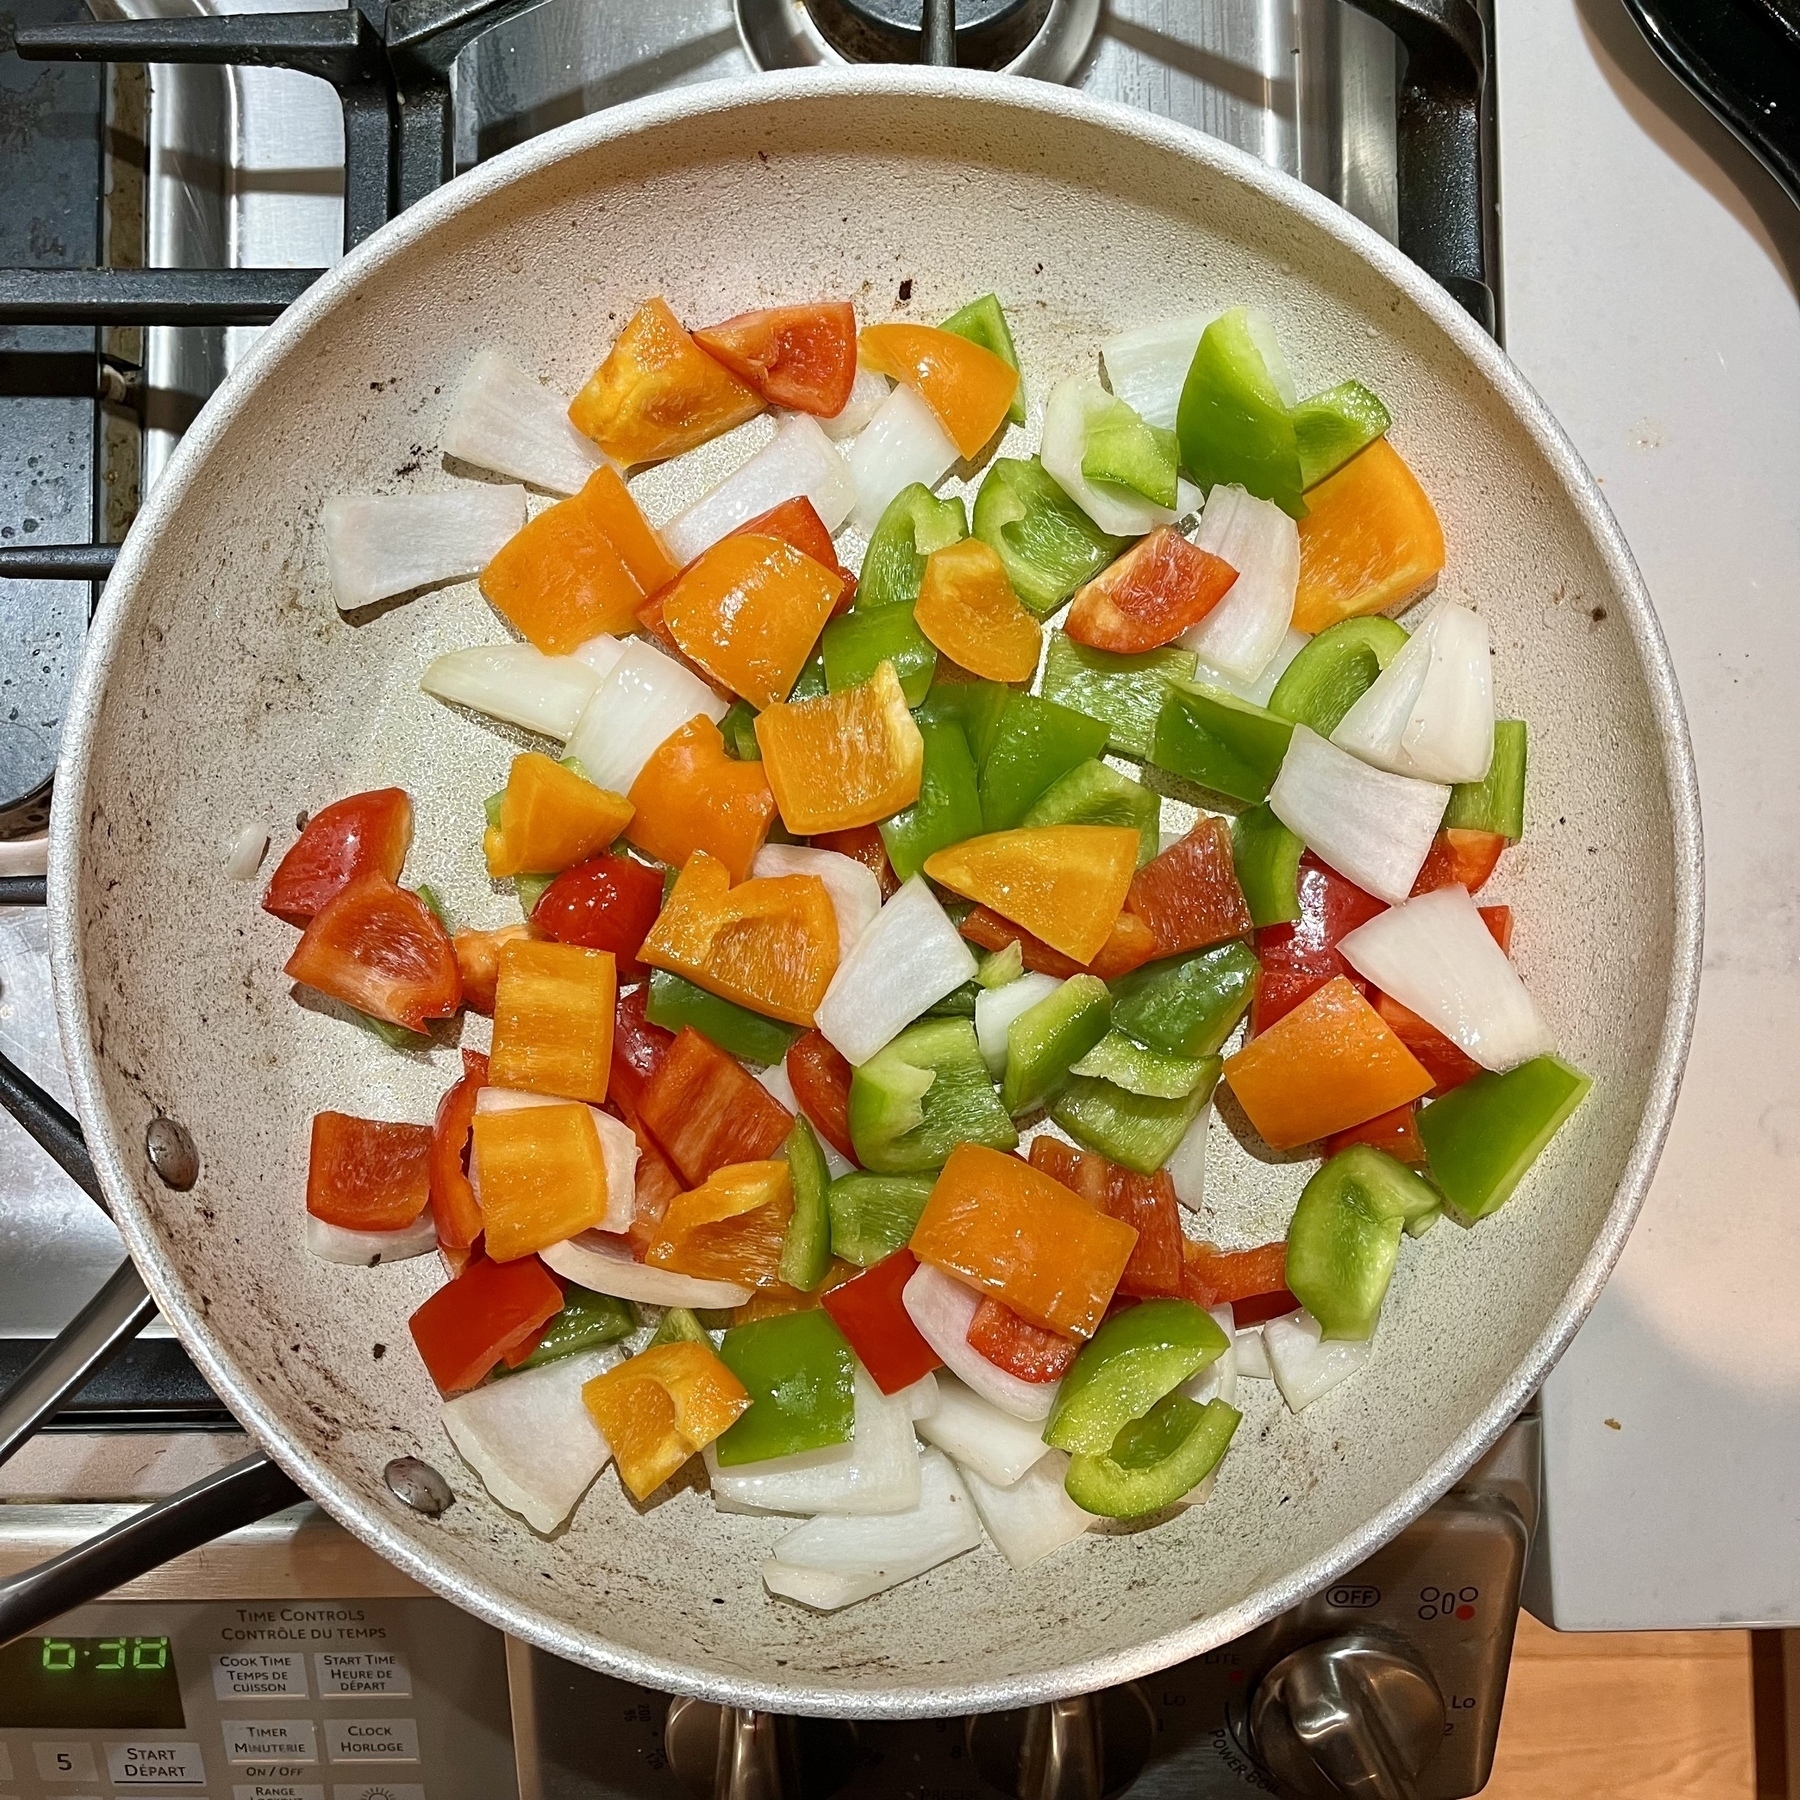 Vegetables in a frying pan, including orange peppers